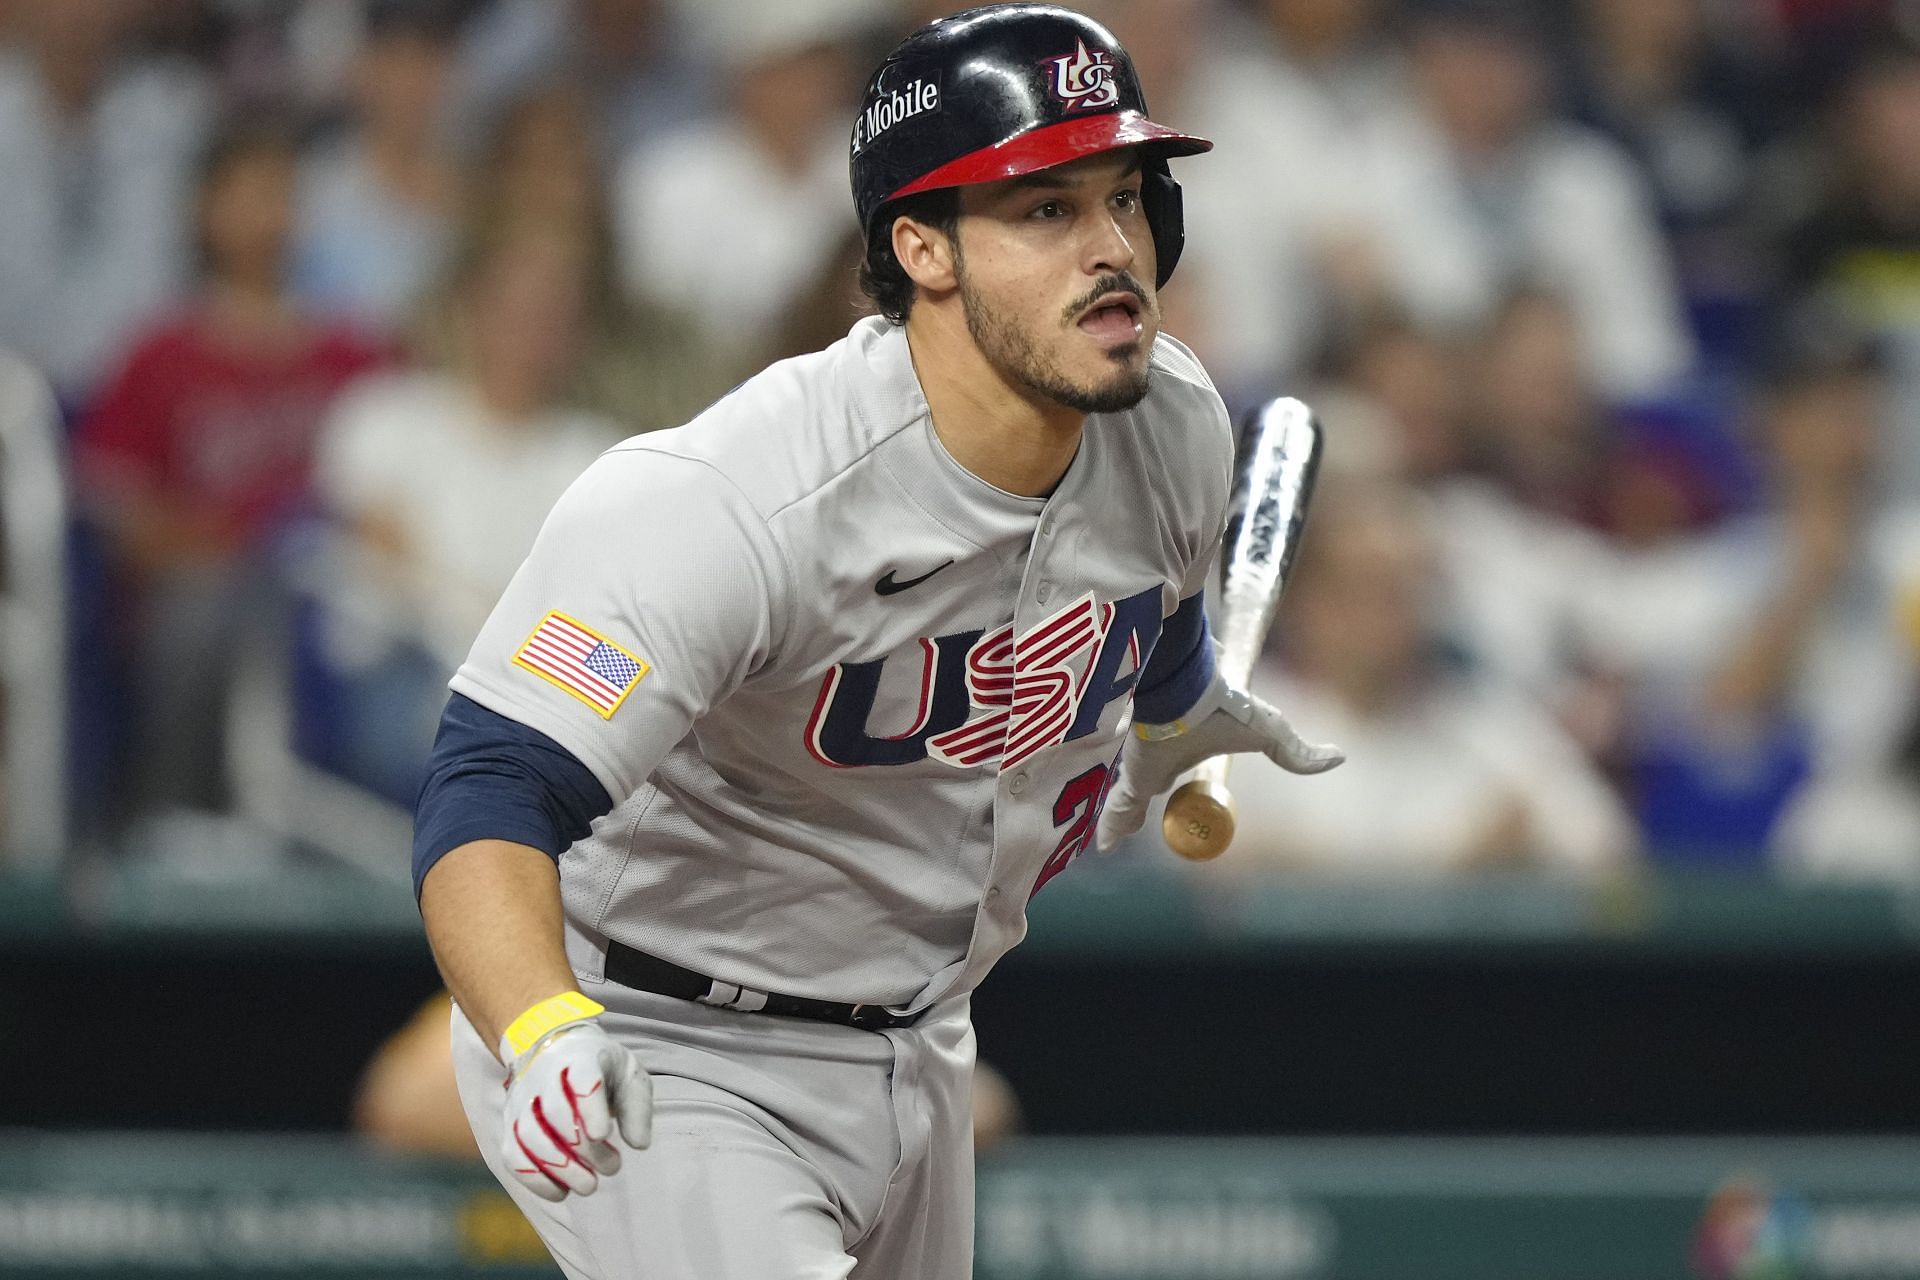 Nolan Arenado was hit by a pitch during the semifinal game against Cuba.